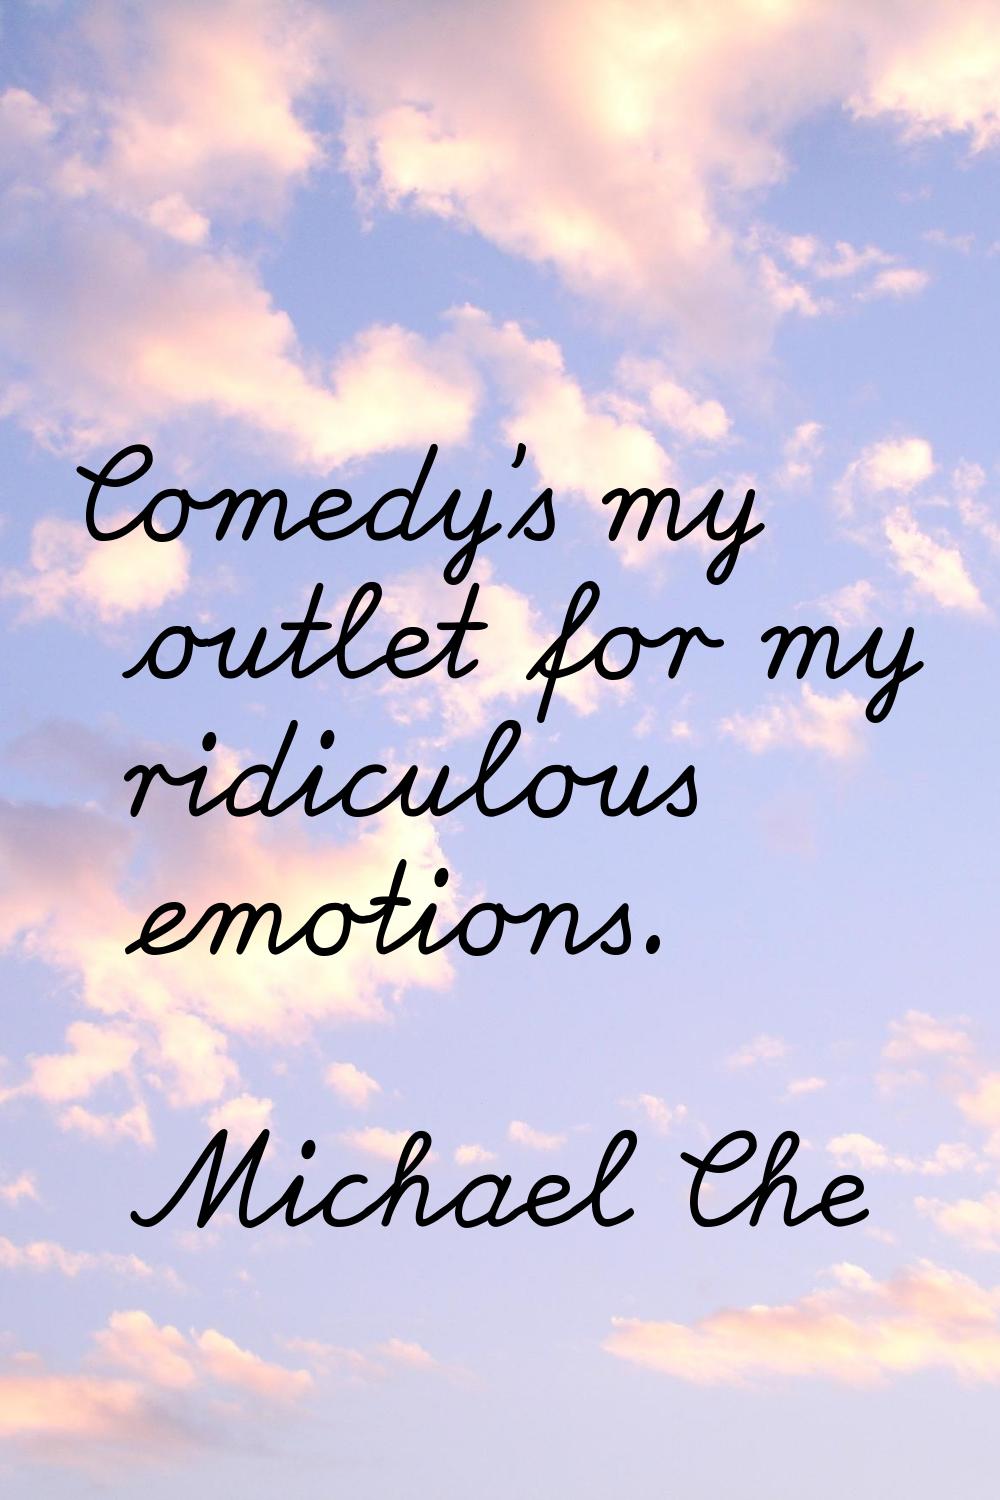 Comedy's my outlet for my ridiculous emotions.